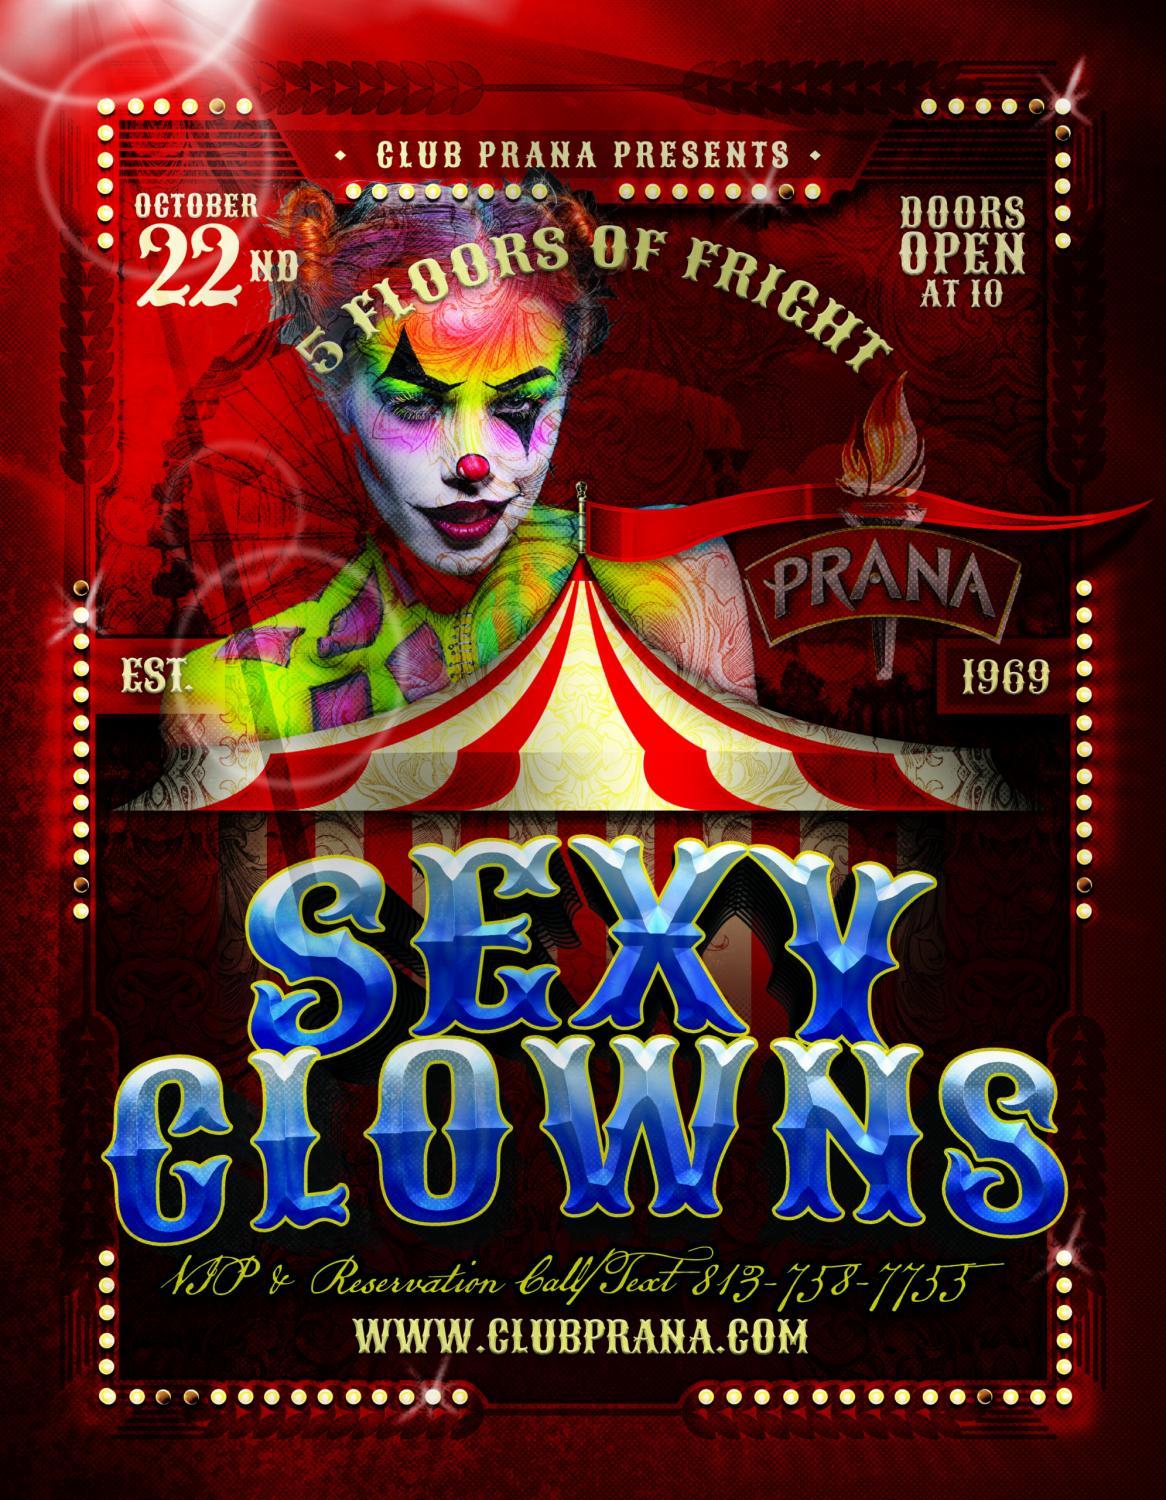 Halloween Sexy Party at Club Prana
Sat Oct 22, 10:00 PM - Sat Oct 22, 12:00 AM
in 2 days